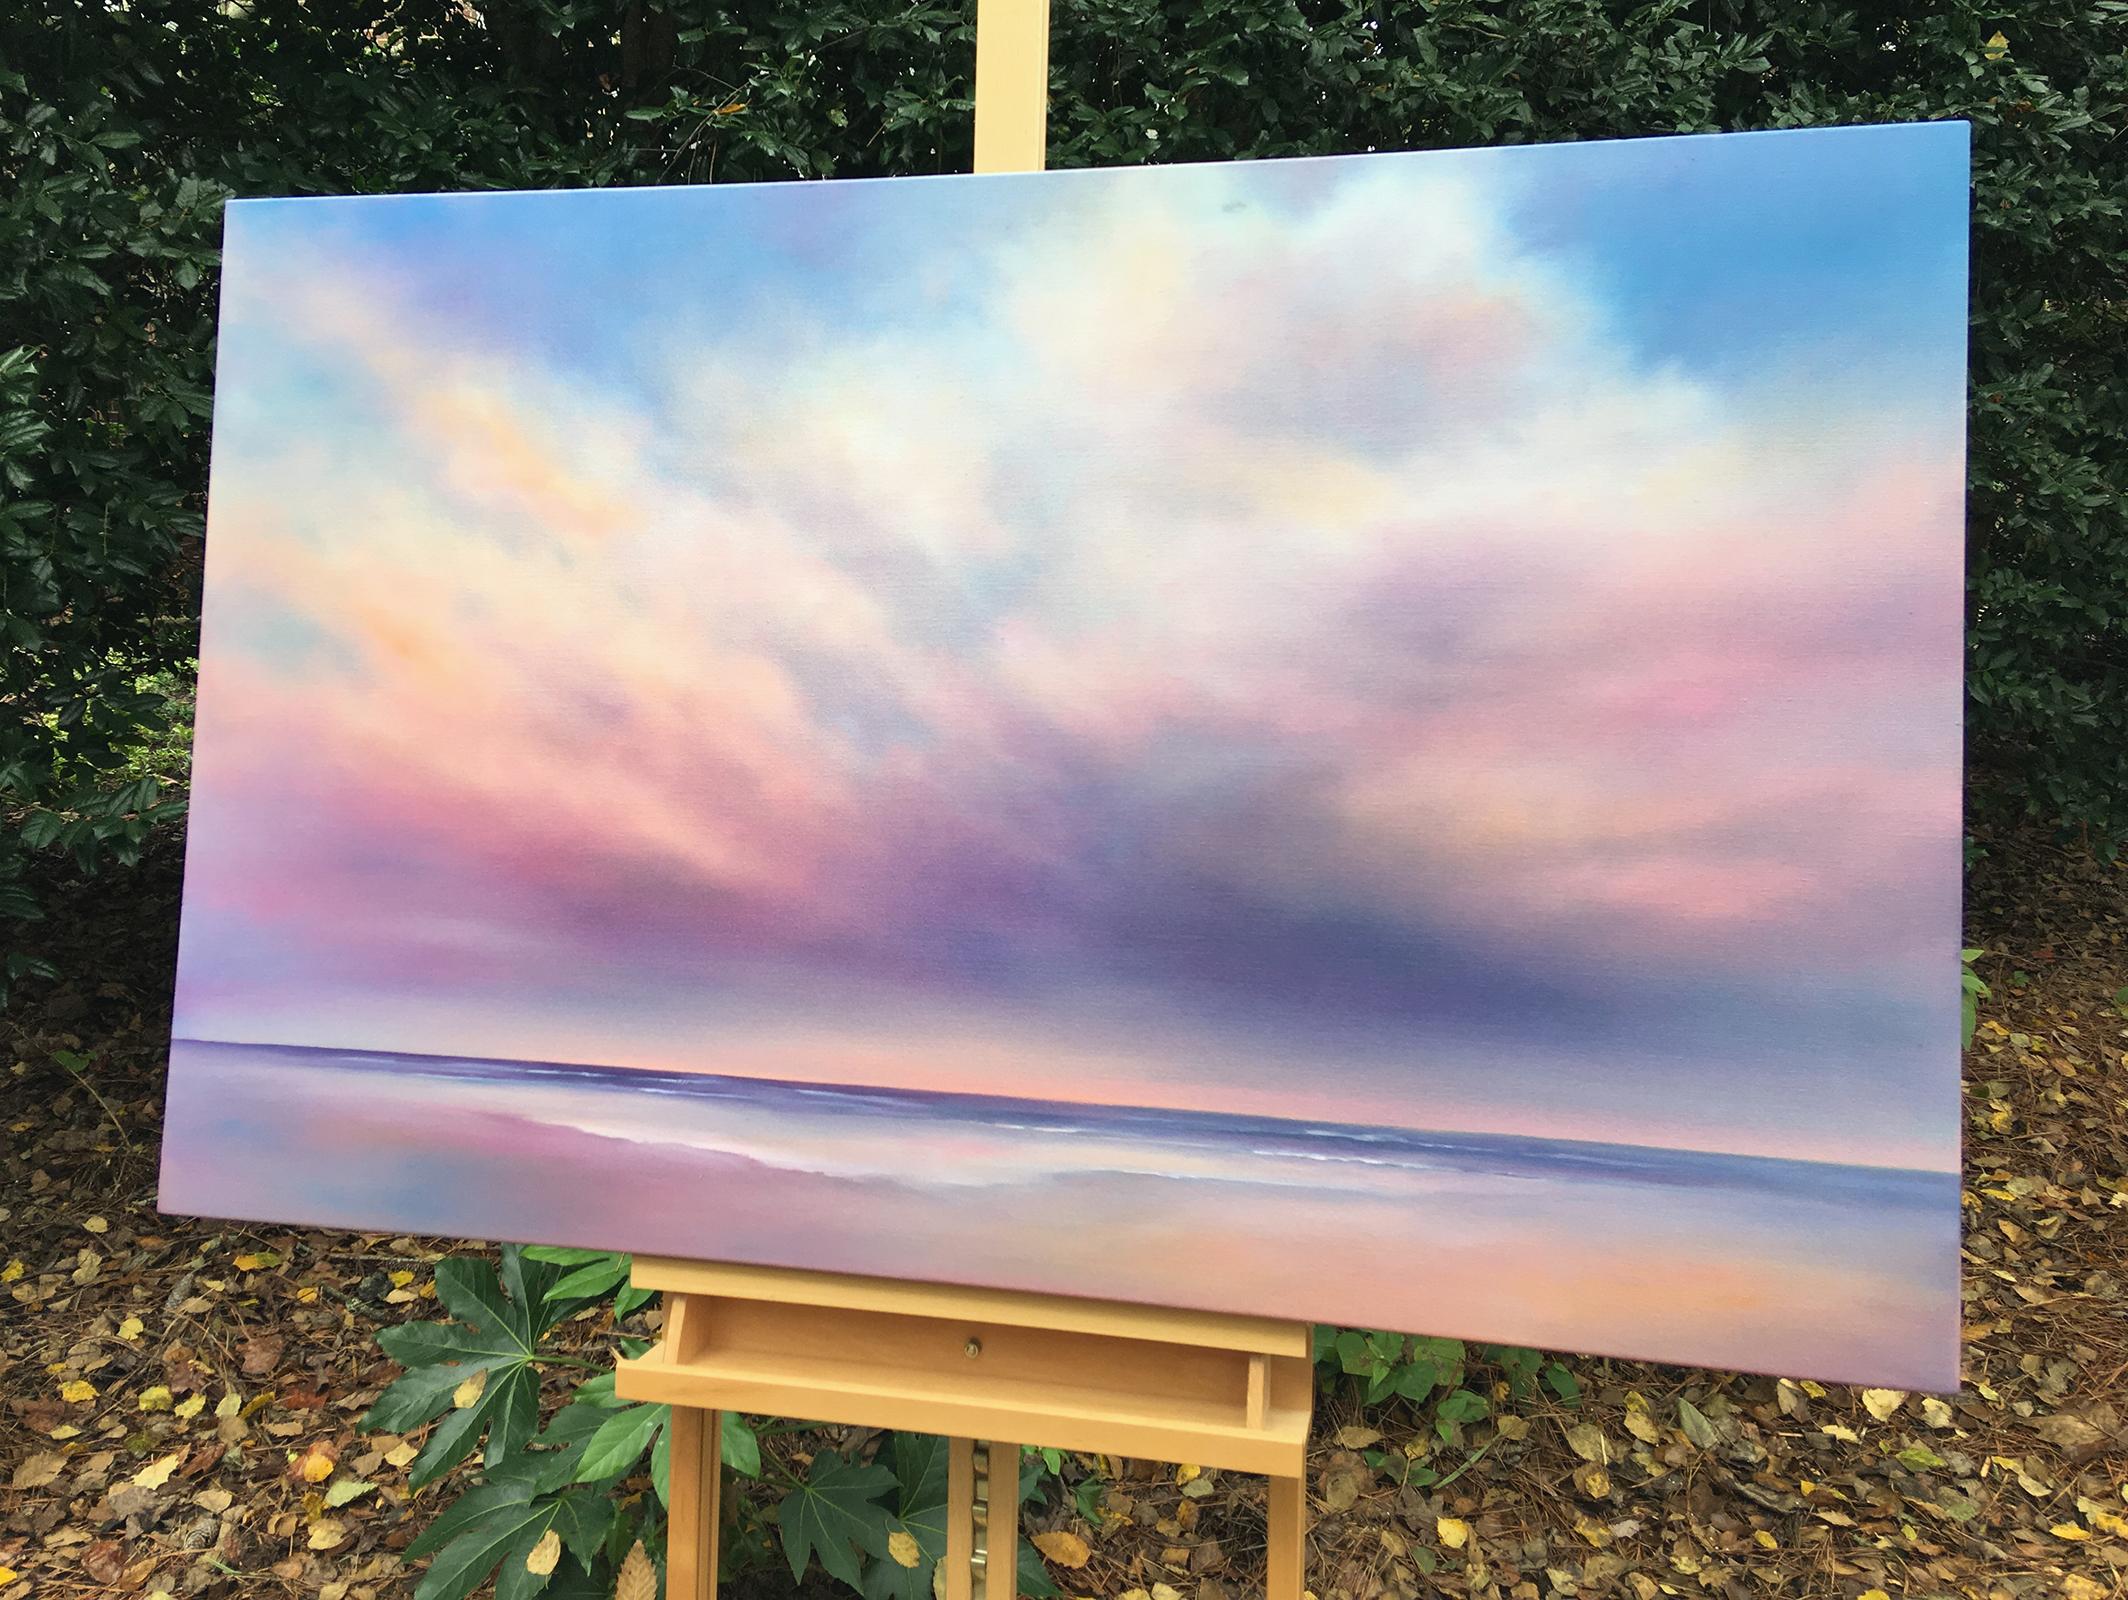 <p>Artist Comments<br>I find infinite inspiration in the beach sky, especially at dusk when amplified colors appear over the ocean. The display in a warm palette is welcomed by the clouds like paint on an artist;s blank canvas.</p><p>About the